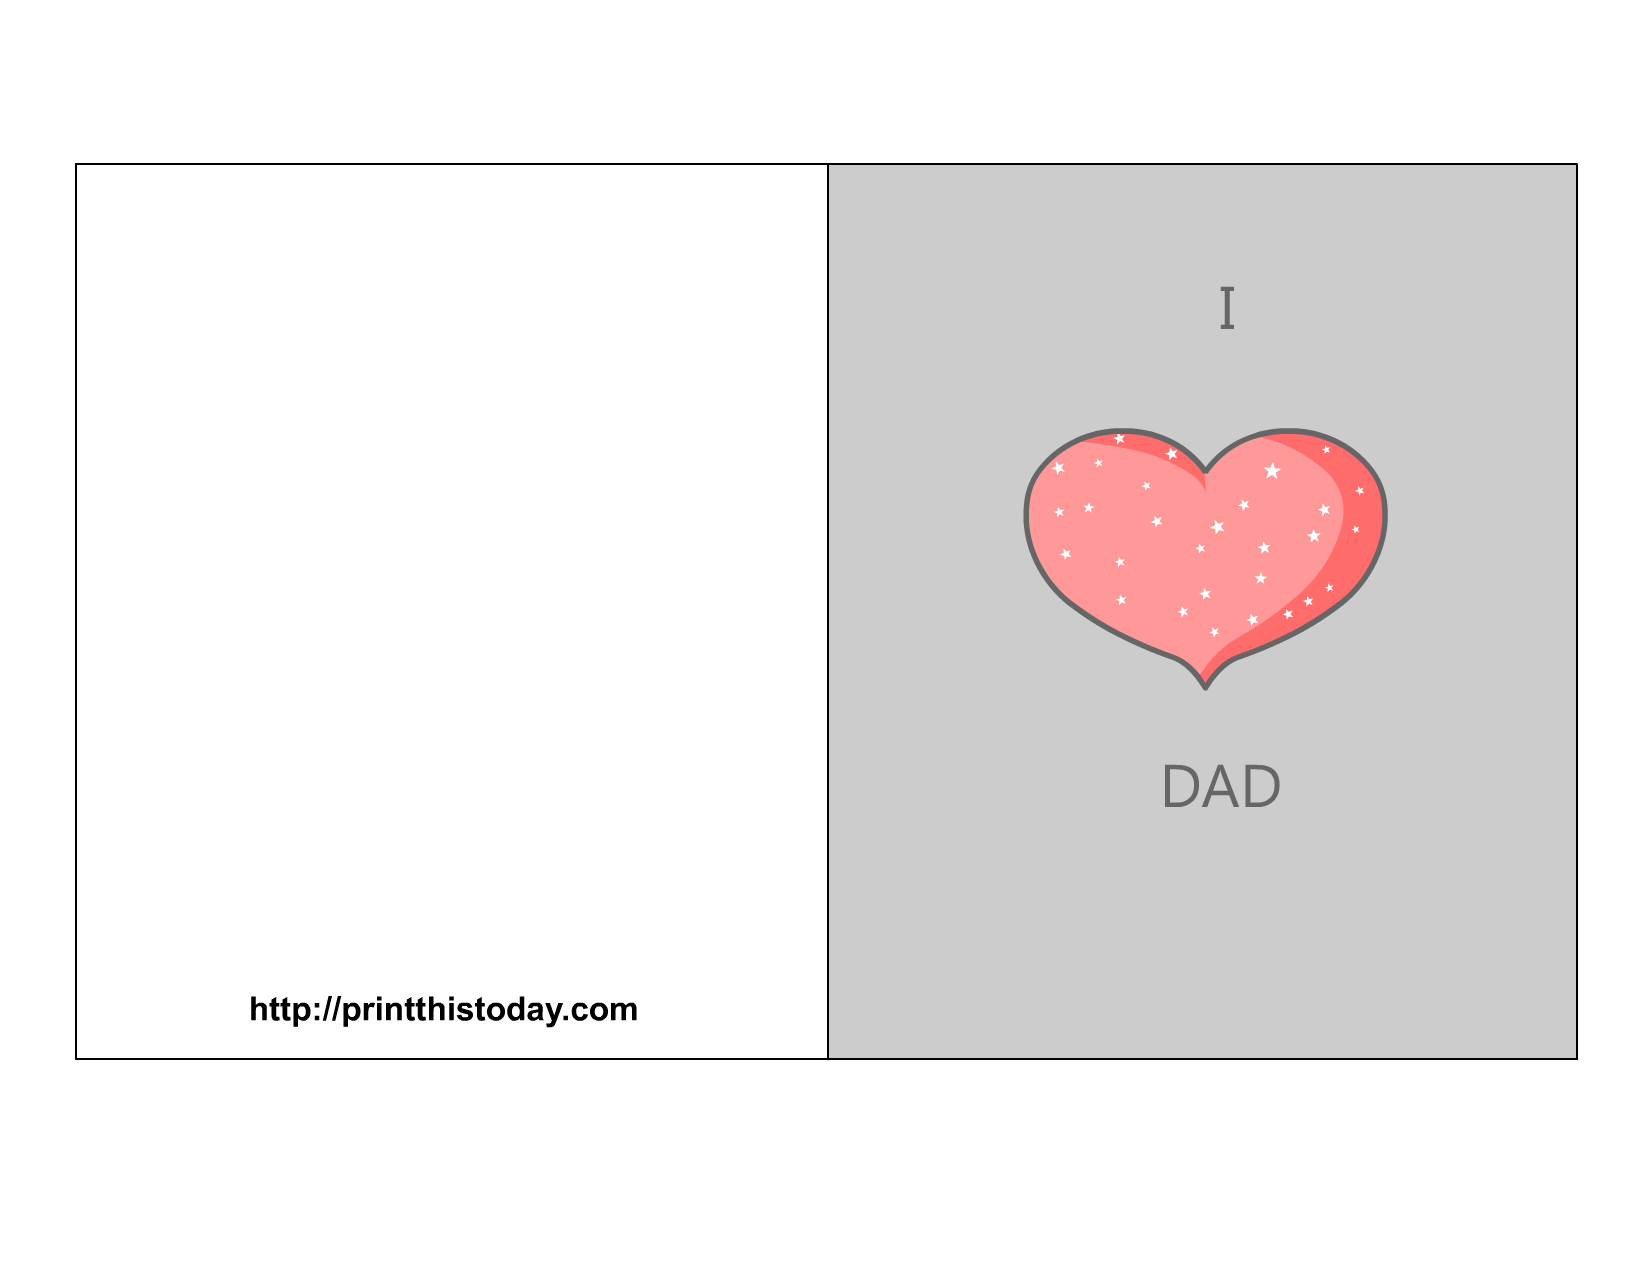 free-father-s-day-cards-printable